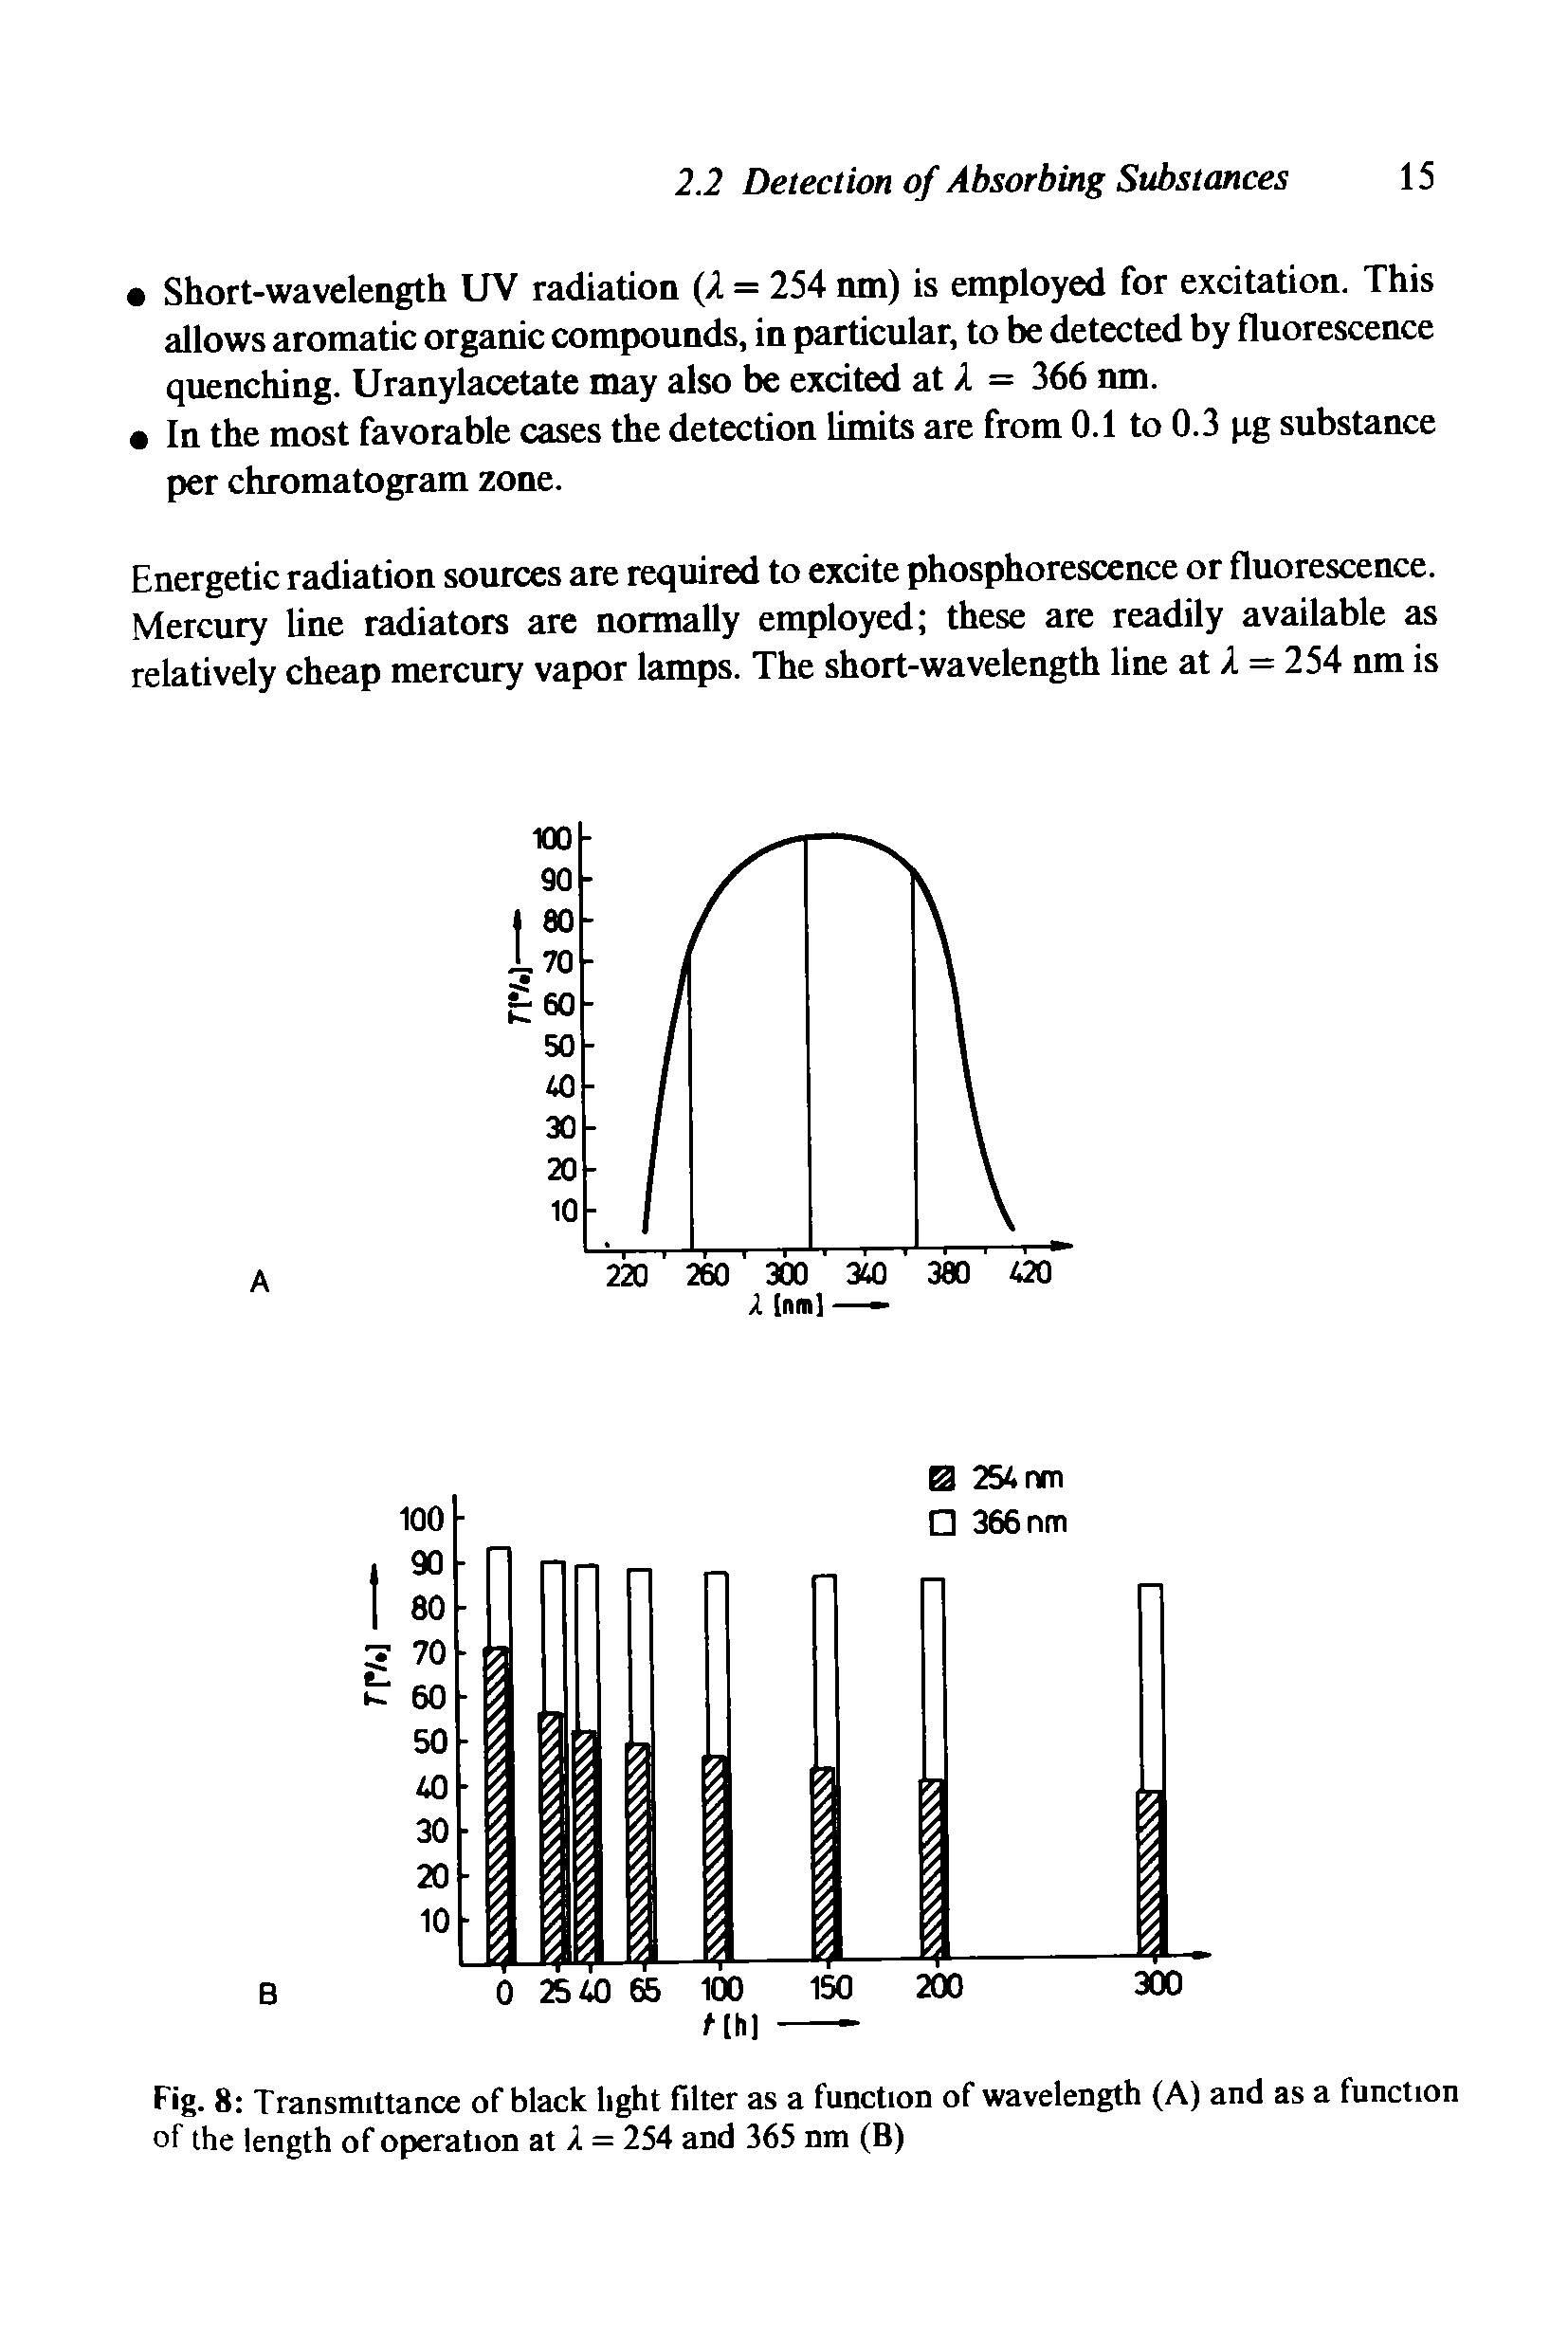 Fig. 8 Transmittance of black light filter as a function of wavelength (A) and as a function of the length of operation at A = 254 and 365 nm (B)...